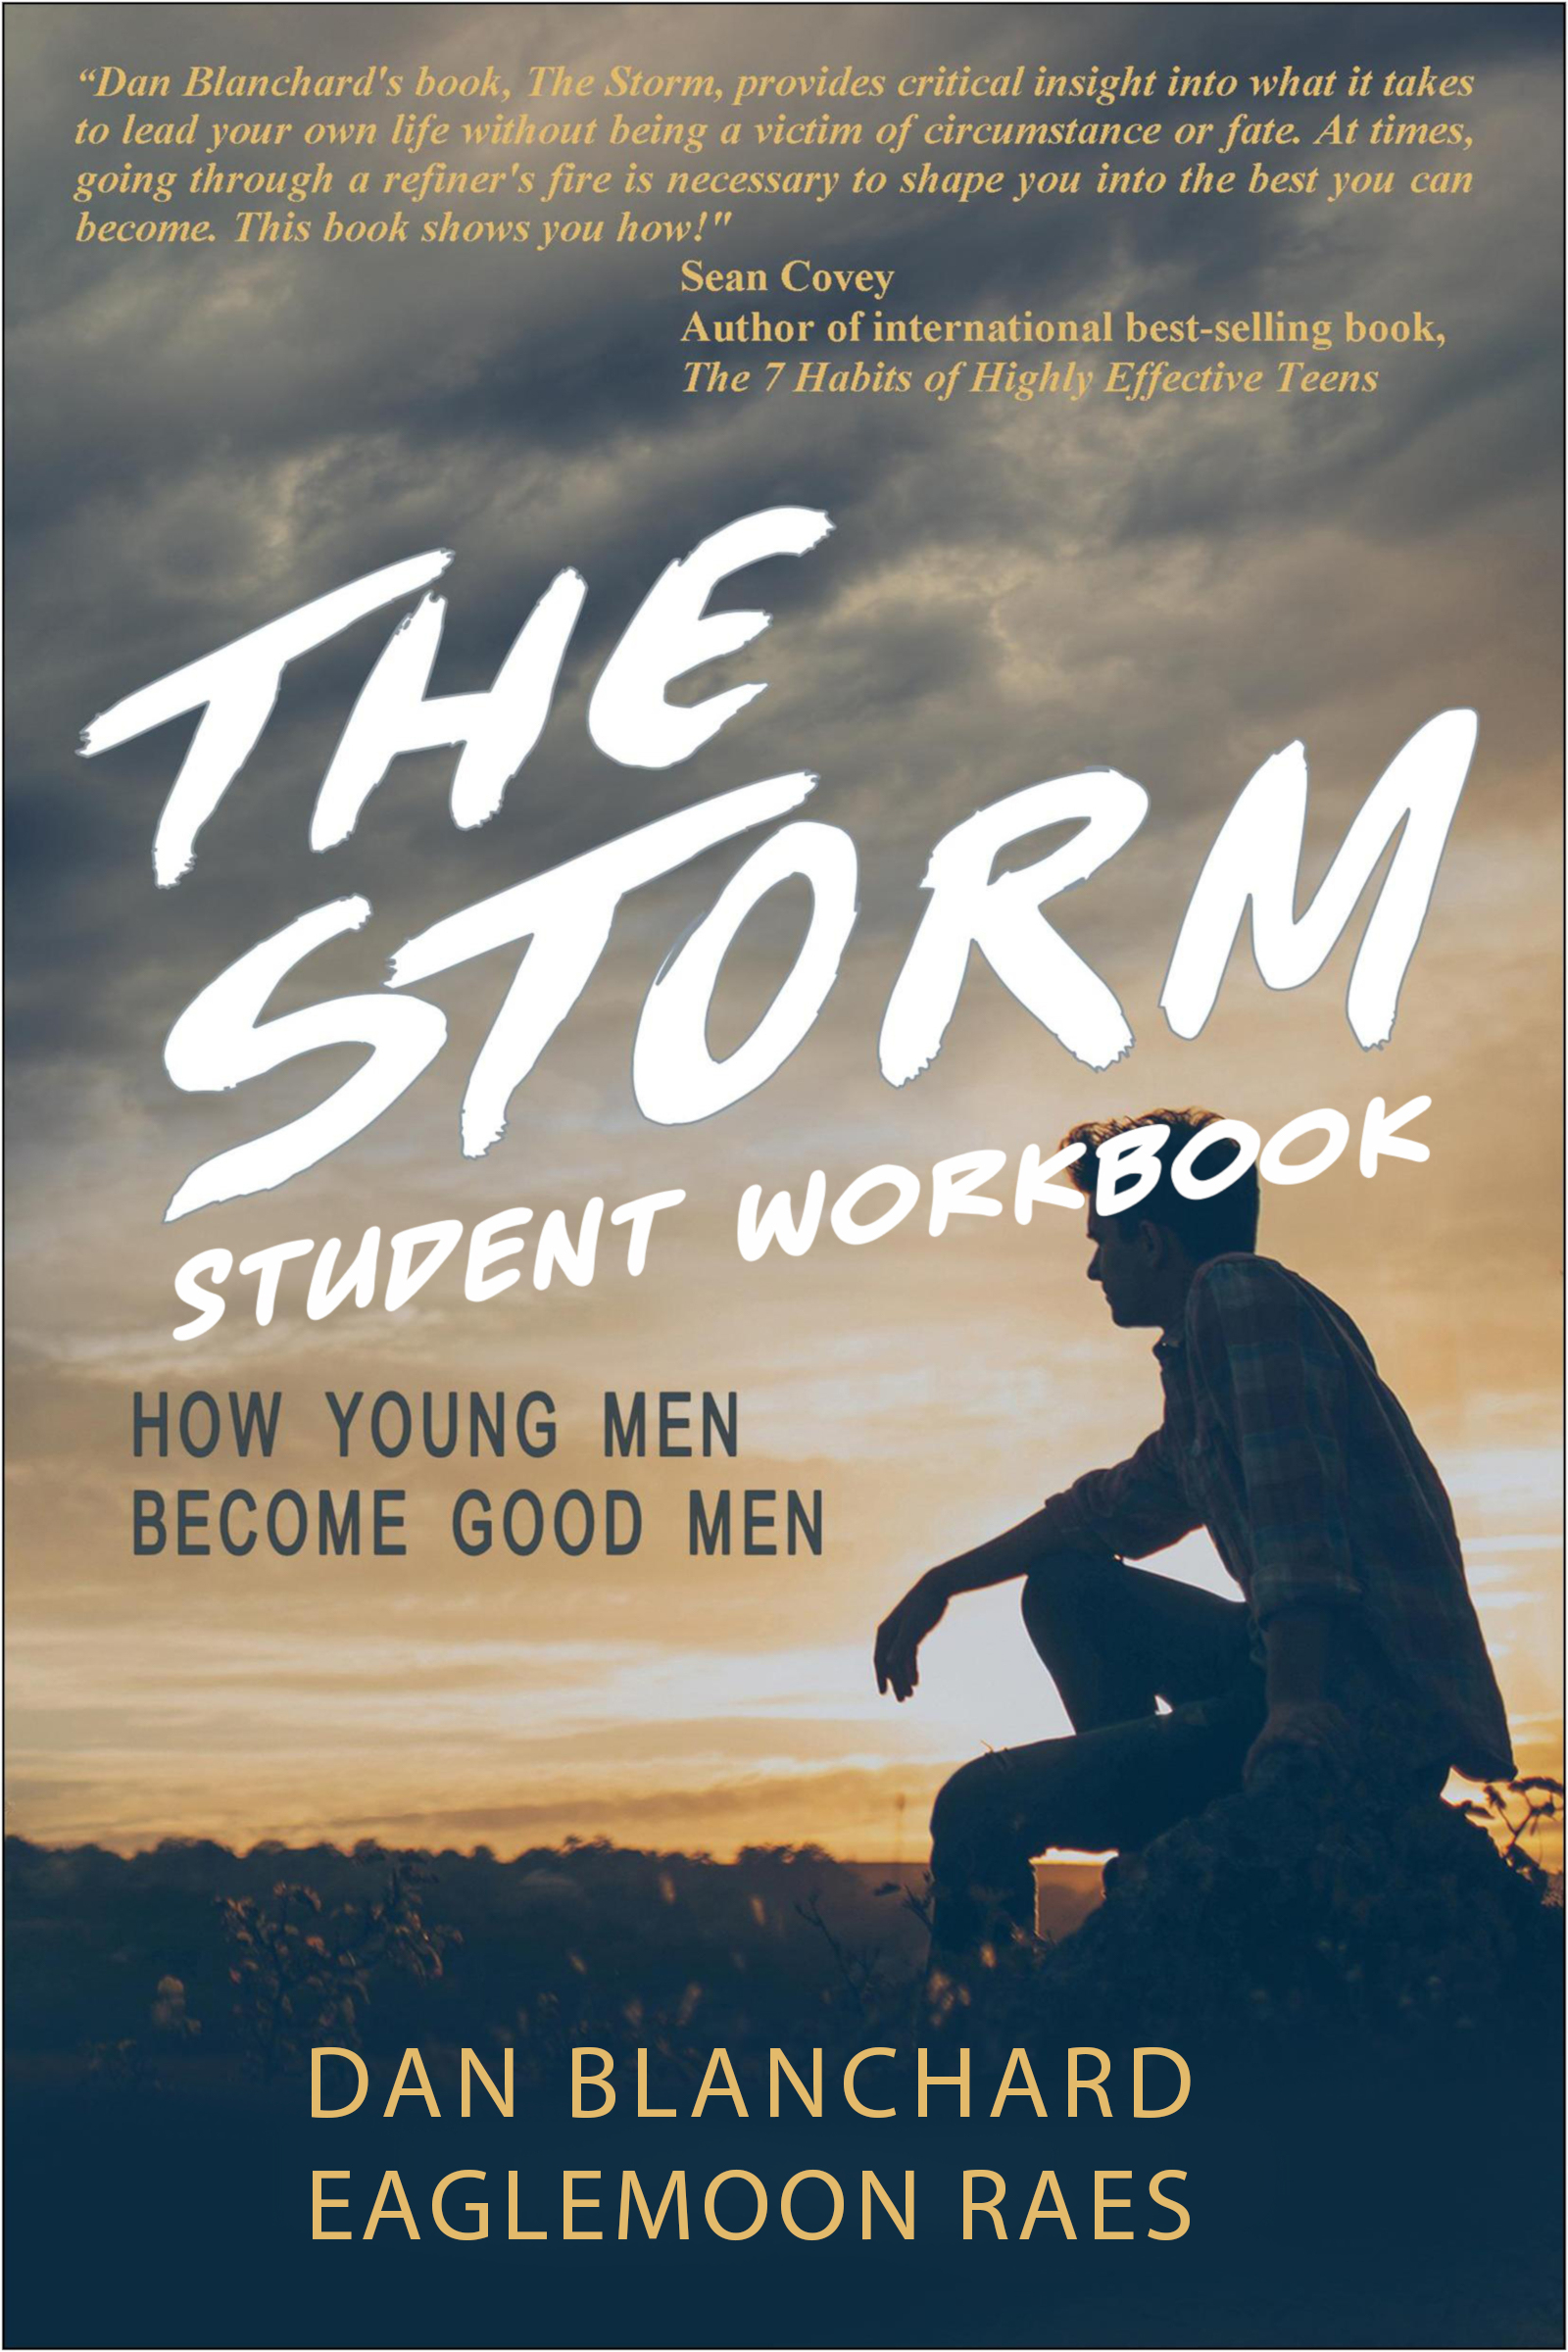 FREE: The Storm Student Workbook by Dan Blanchard